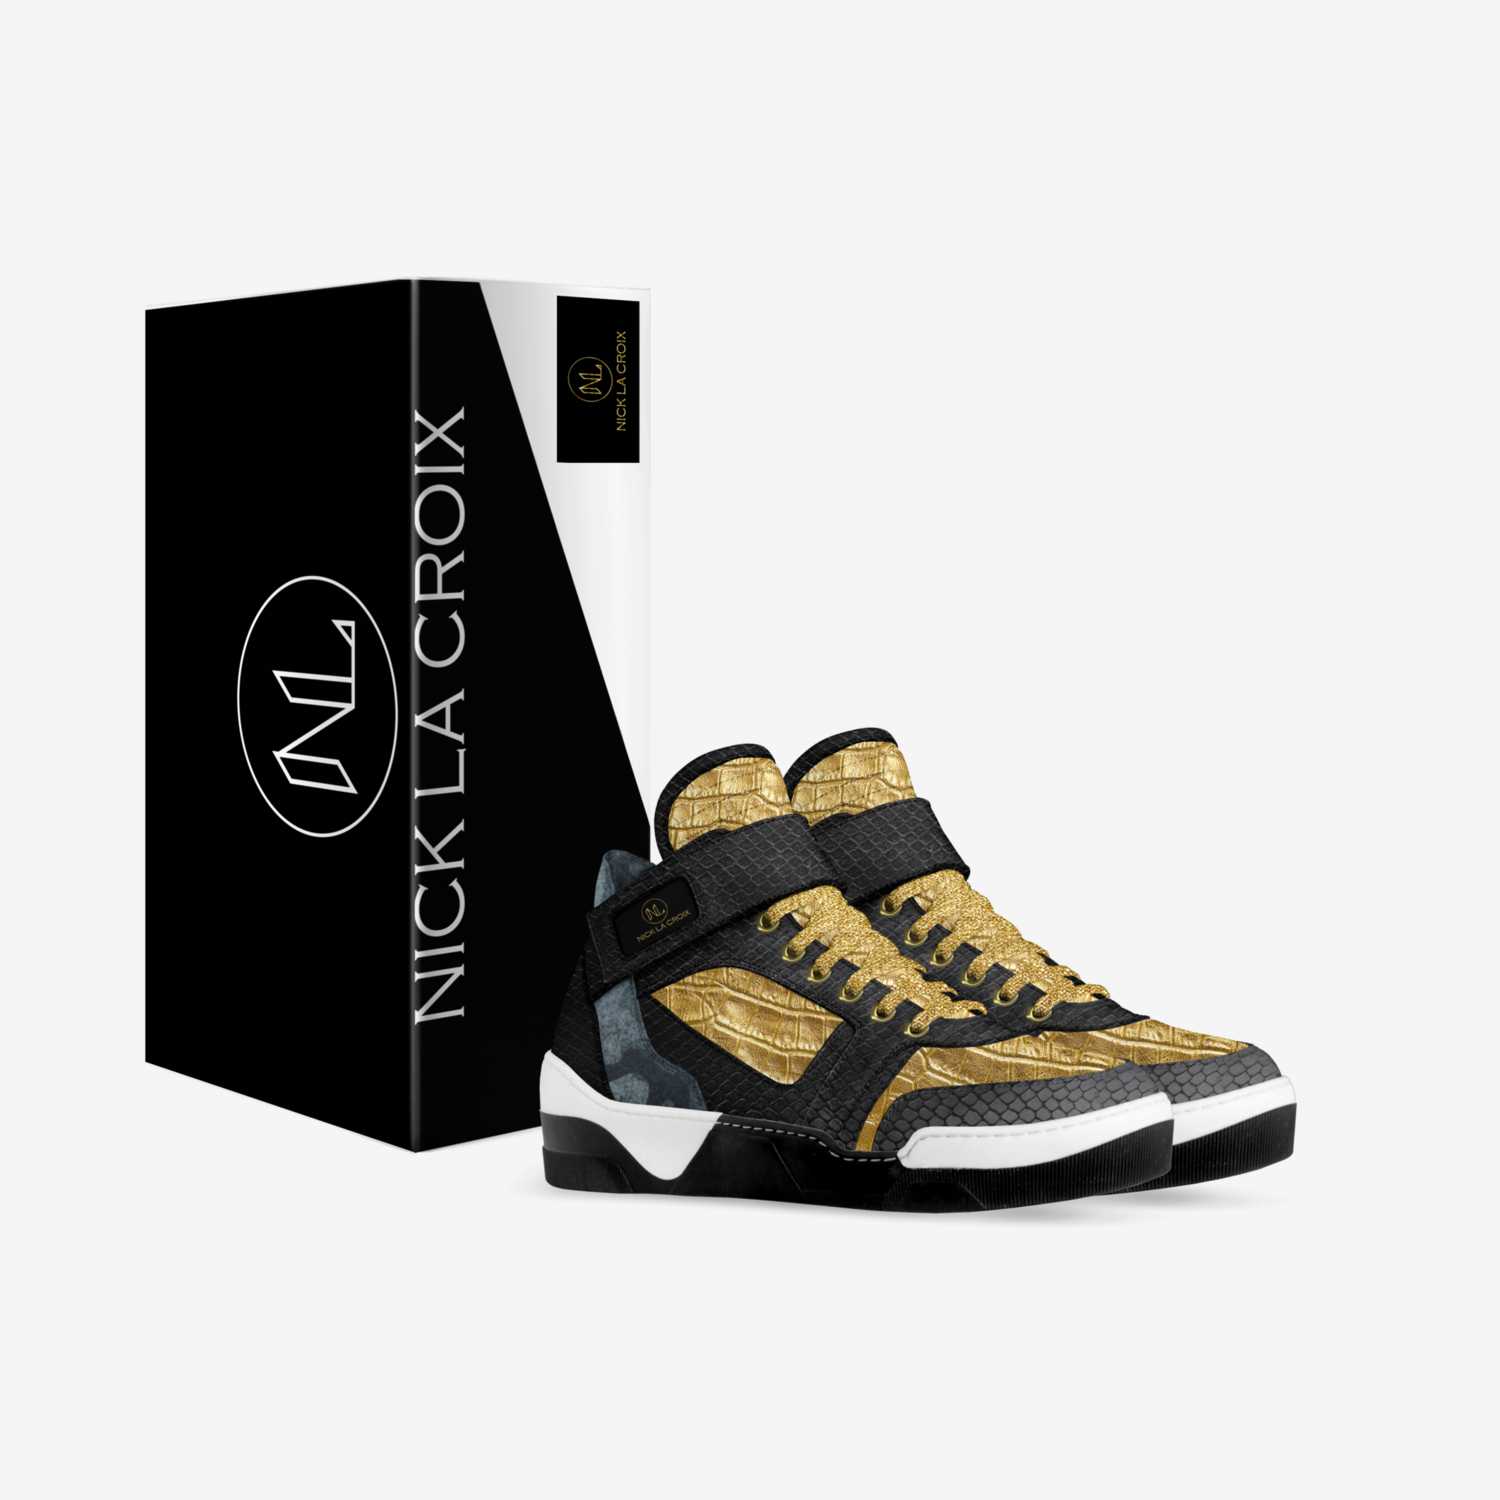 Golden Knight custom made in Italy shoes by Nick La Croix | Box view